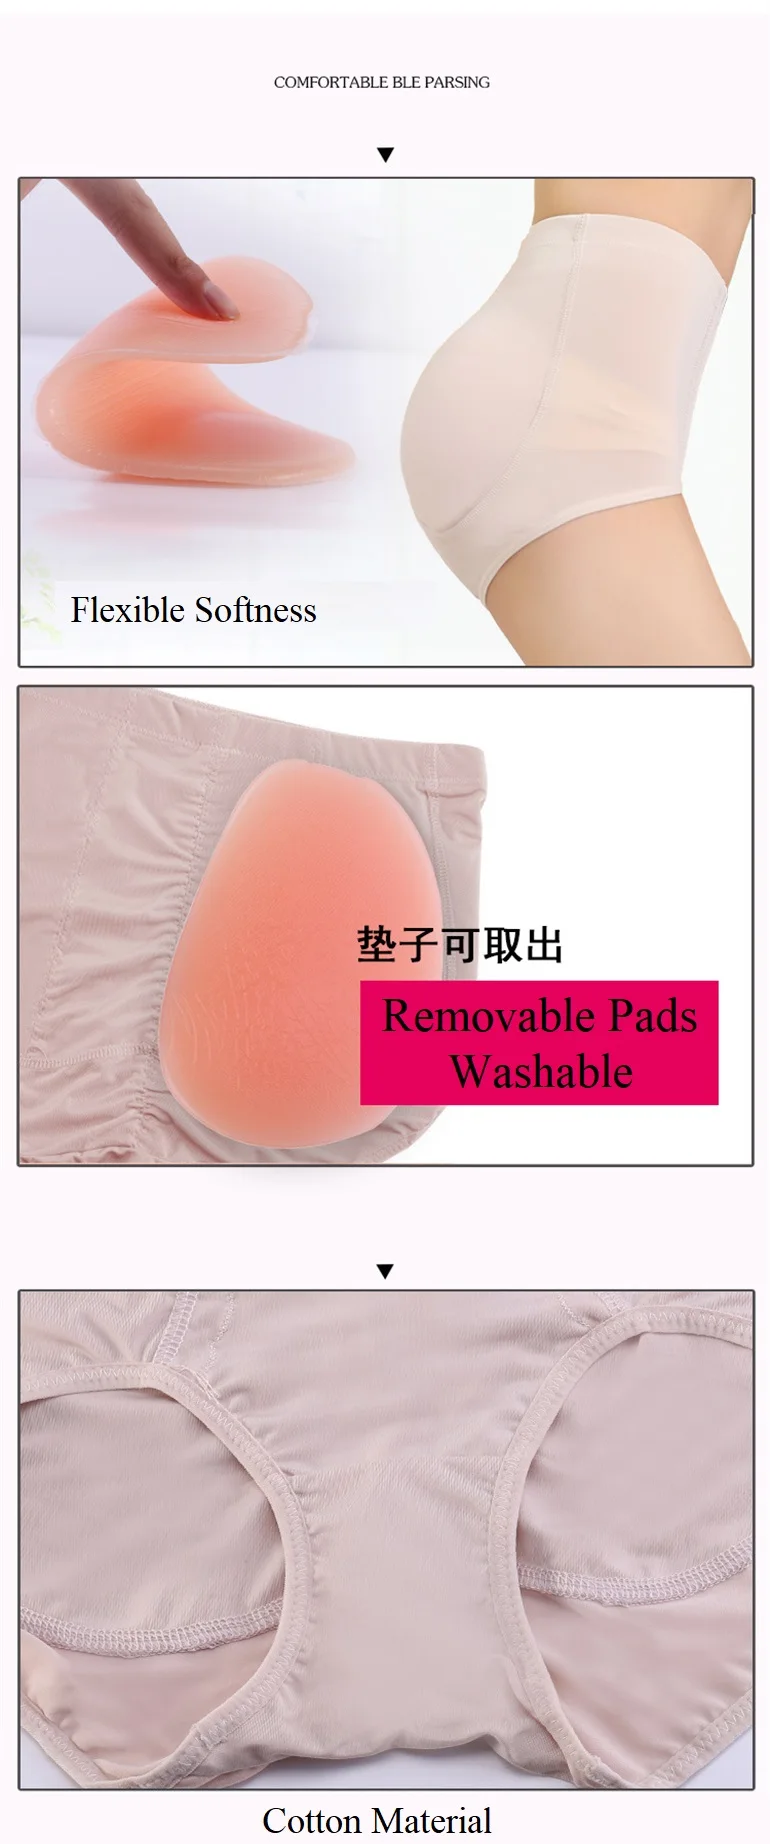 Natral Silicone Pad Enhancer Fake Ass Panty Hip Butt Lifter